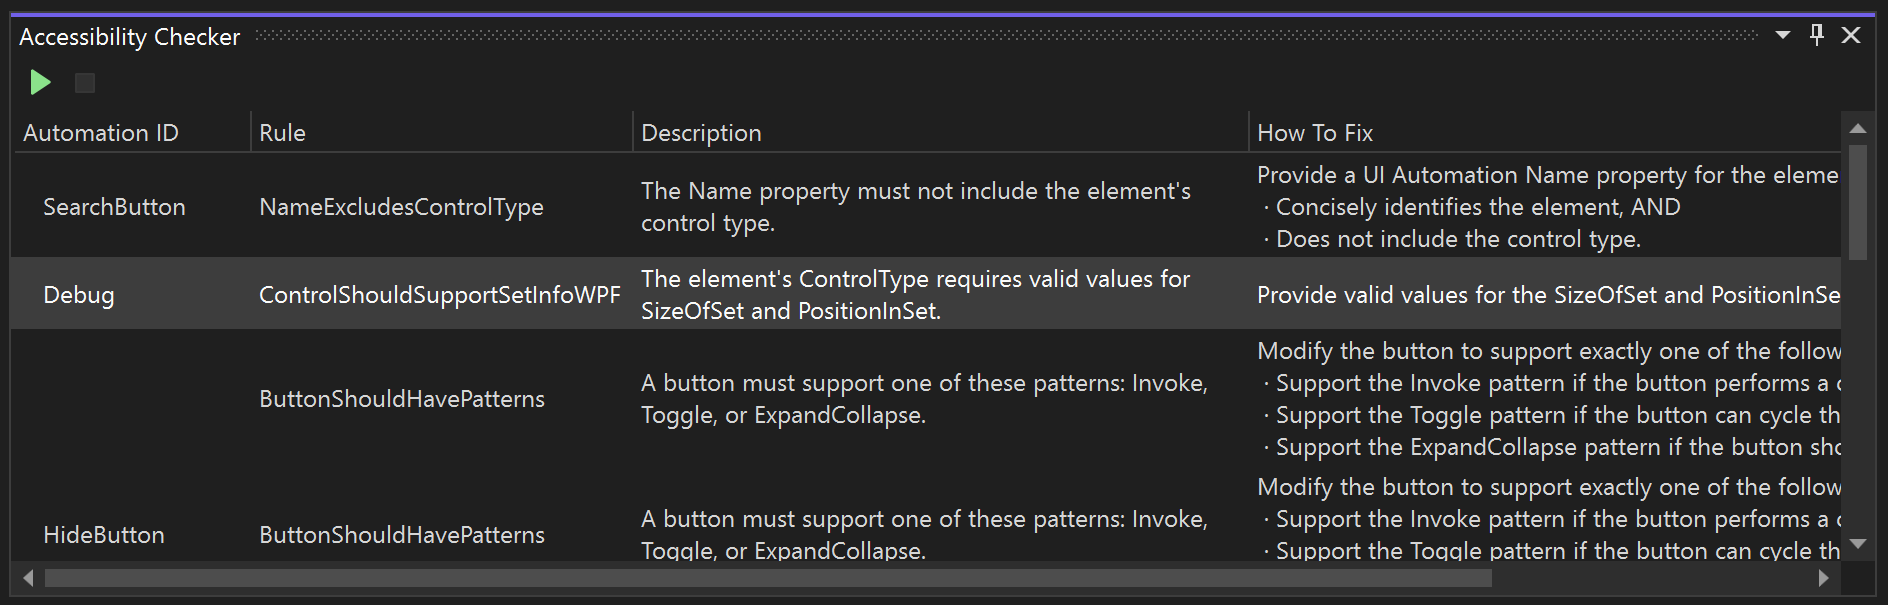 The Accessibility Checker panel in Visual Studio showing a variety of accessibility issues that were detected during a scan of an application.